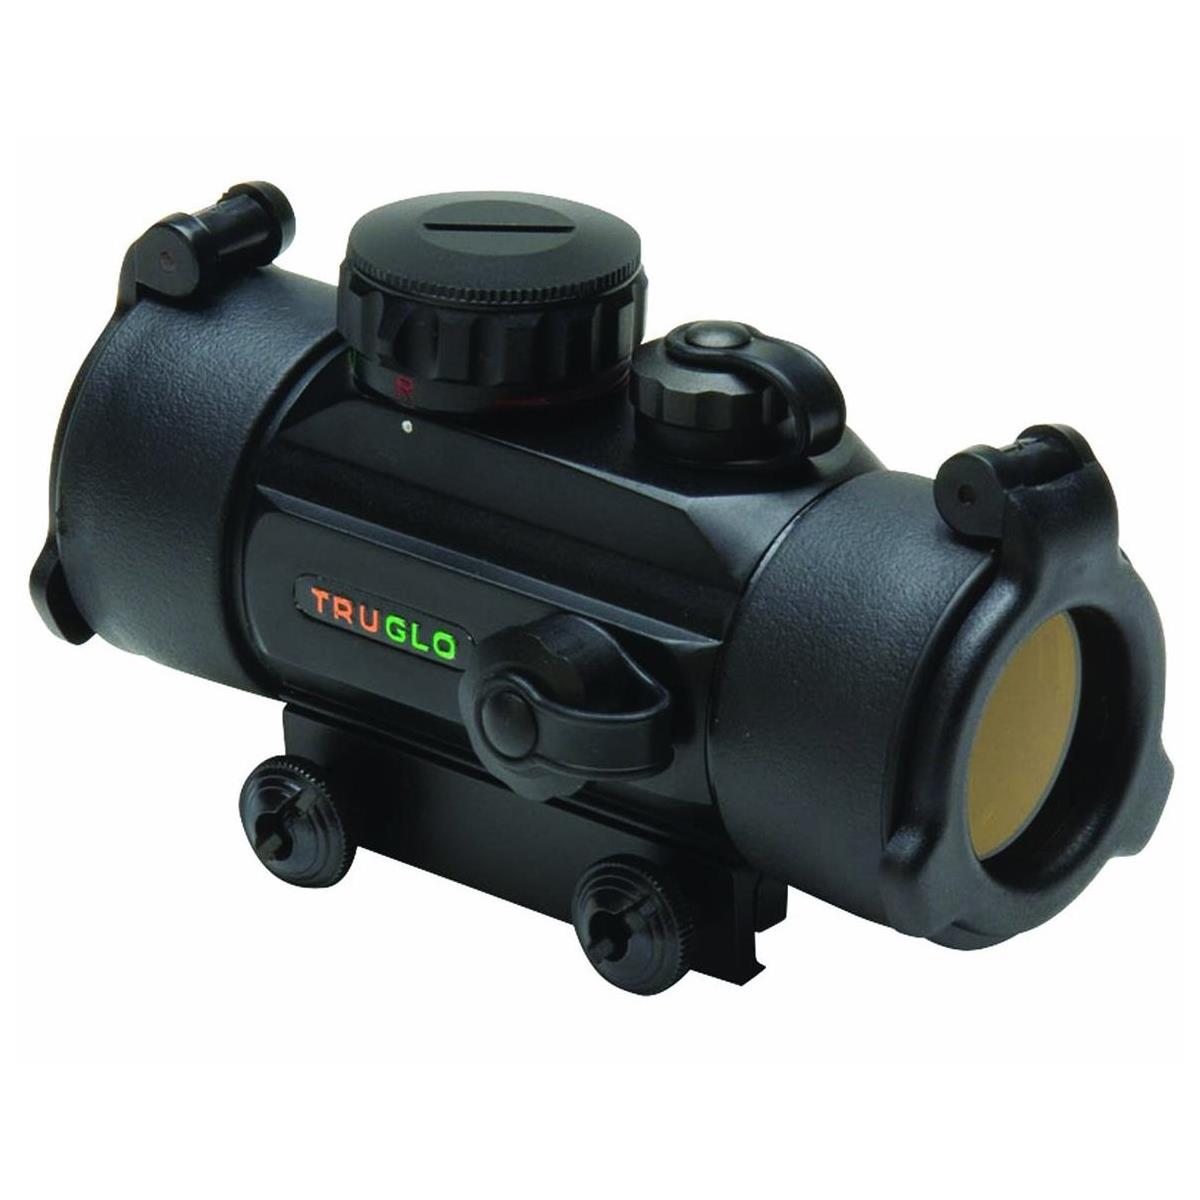 Image of TruGlo 1x30mm Tactical Red-Dot Sight with NE Cantilever Mount